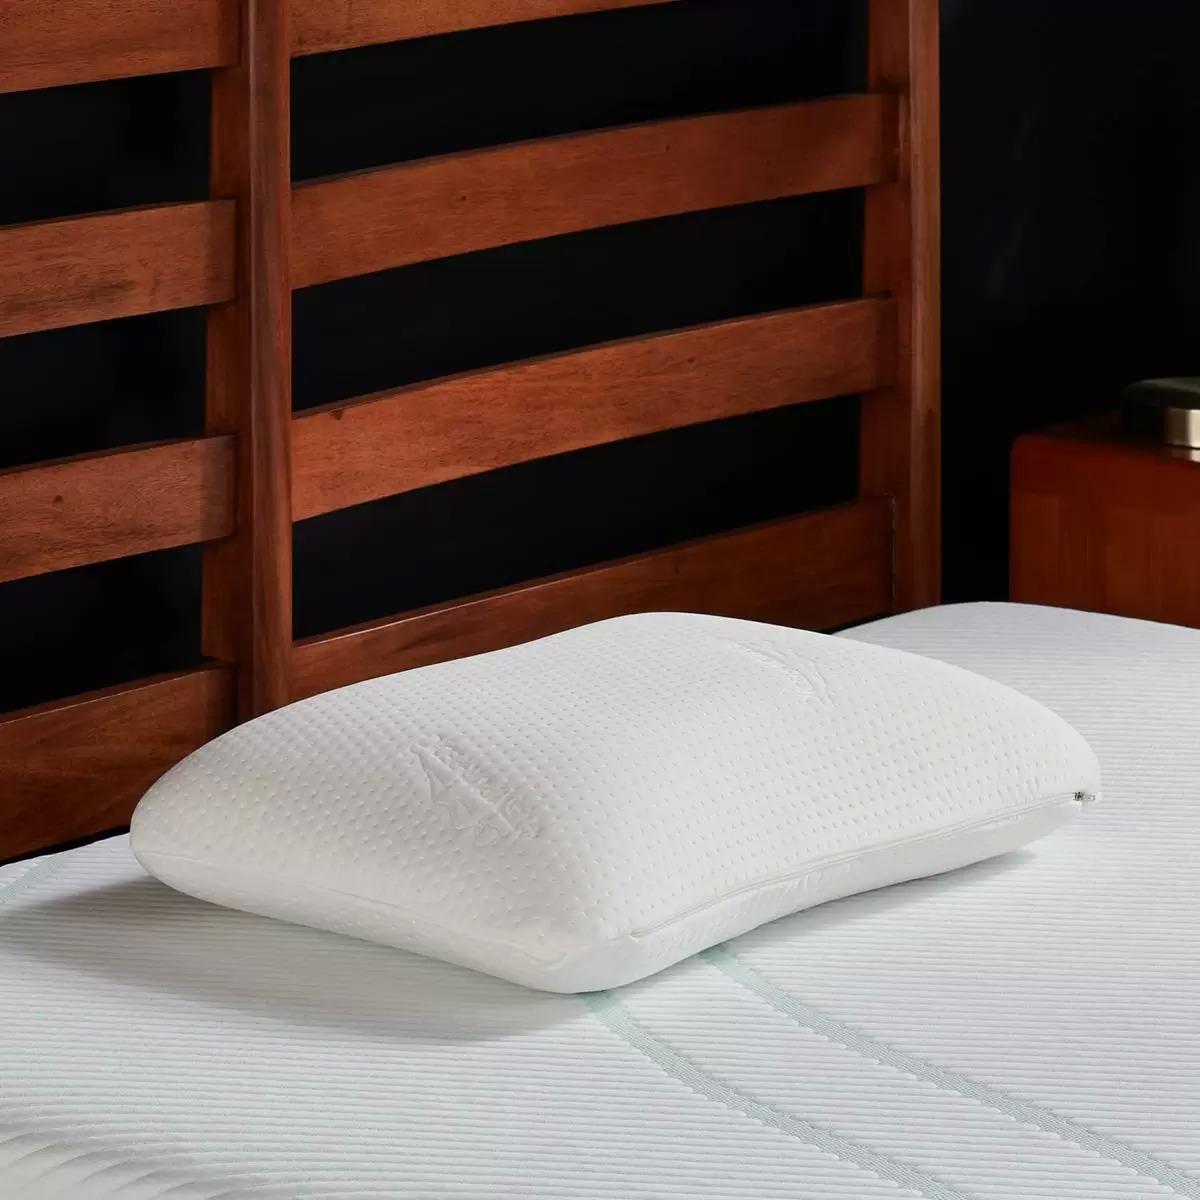 Tempur-Pedic Symphony Pillow Luxury Soft Feel for $41.97 Shipped